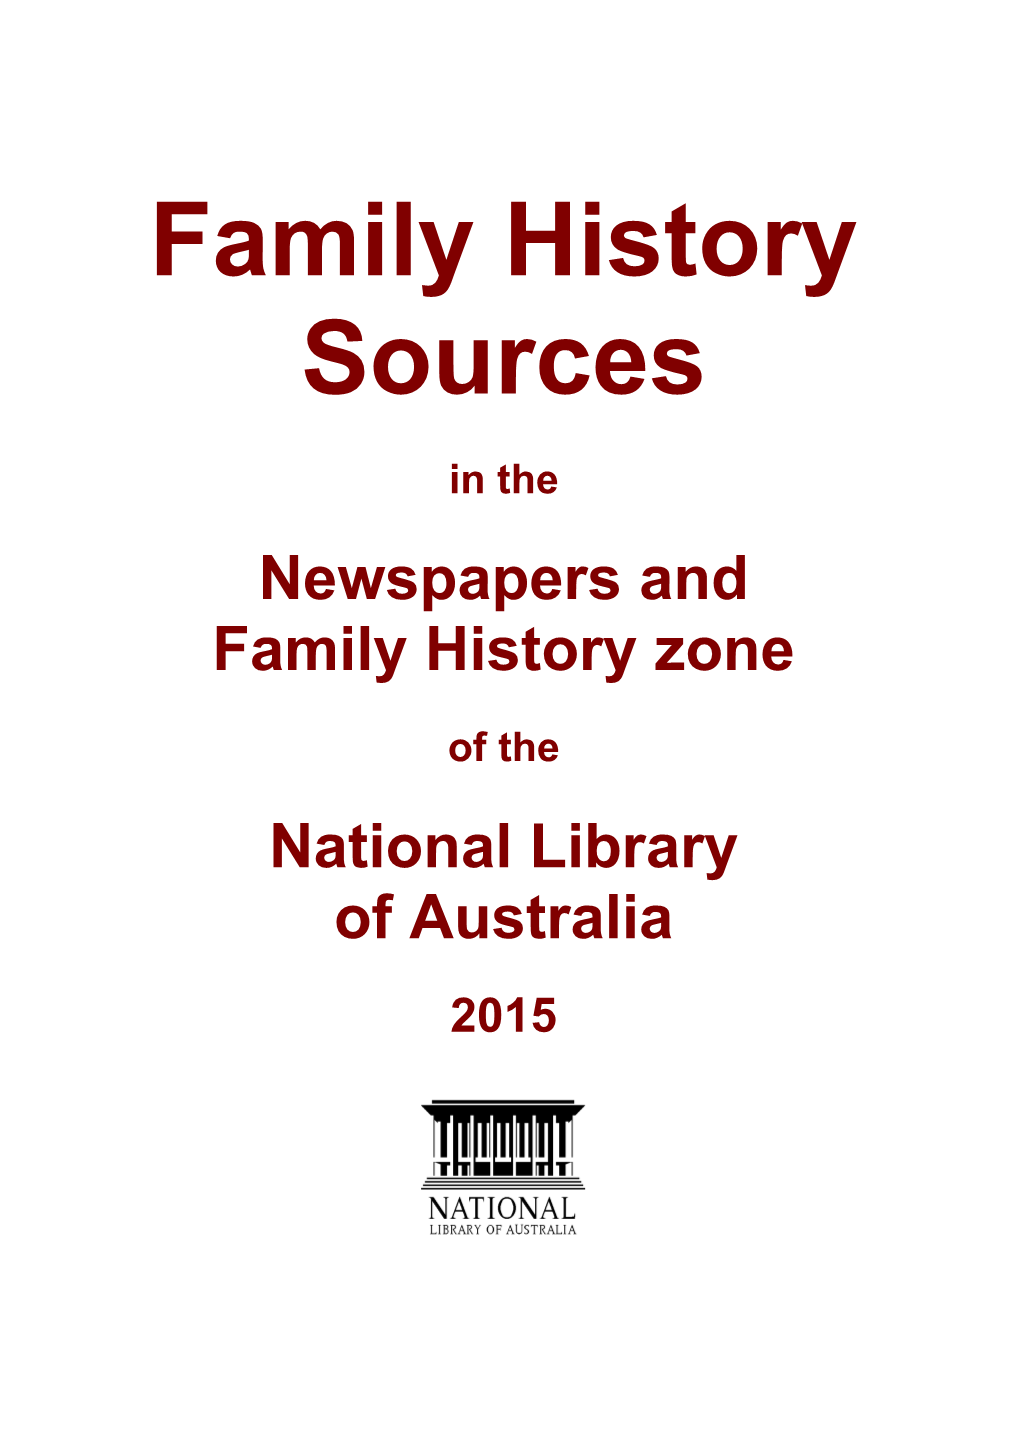 Newspapers and Family History Zone